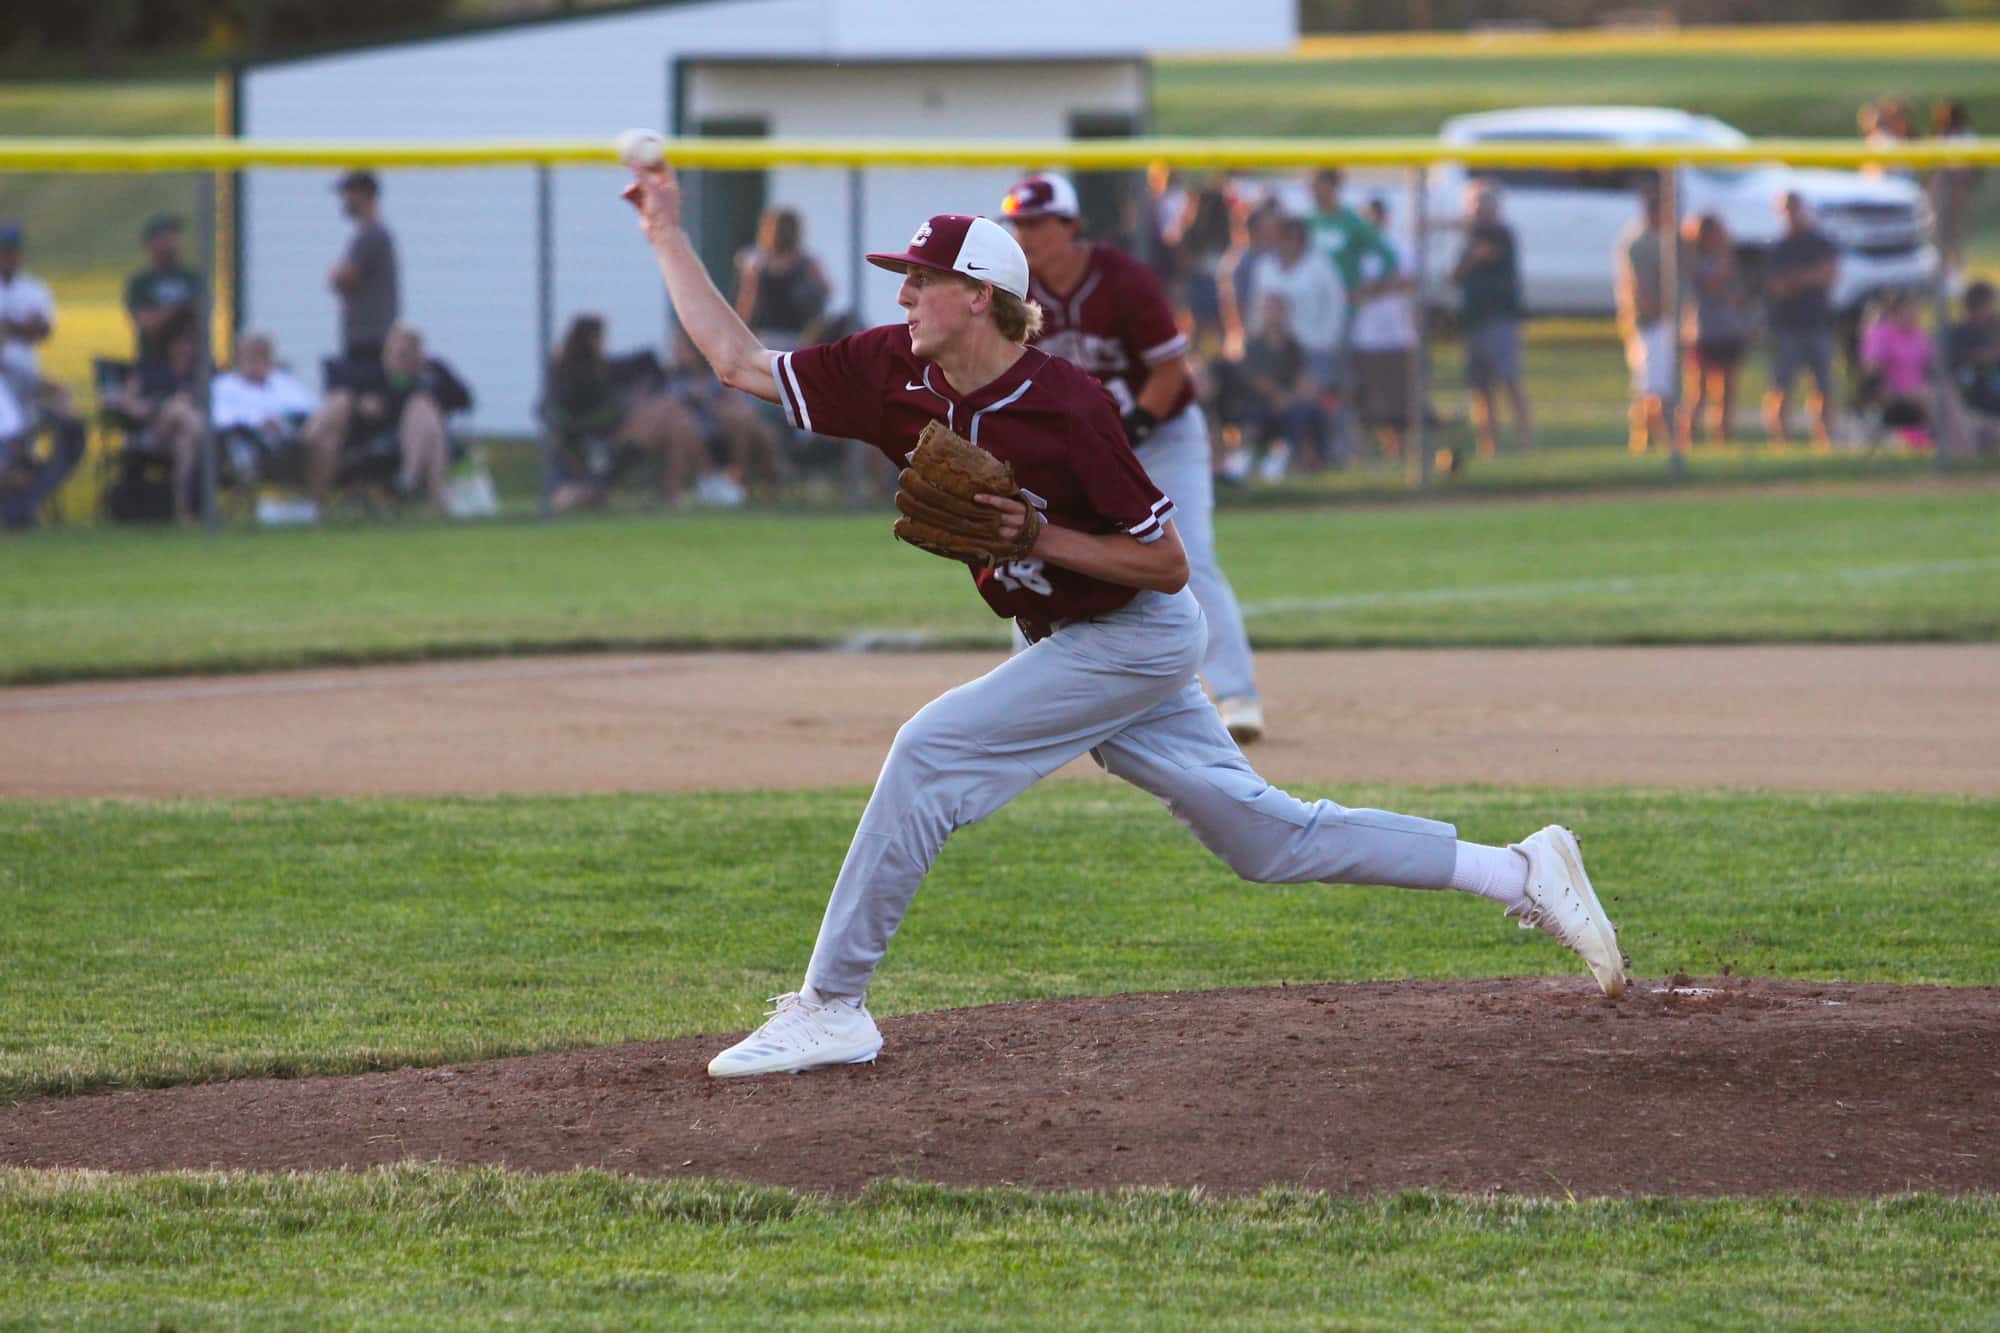 Costly Errors Cause Headaches for Eagles Against No. 8 Hawks KNIA